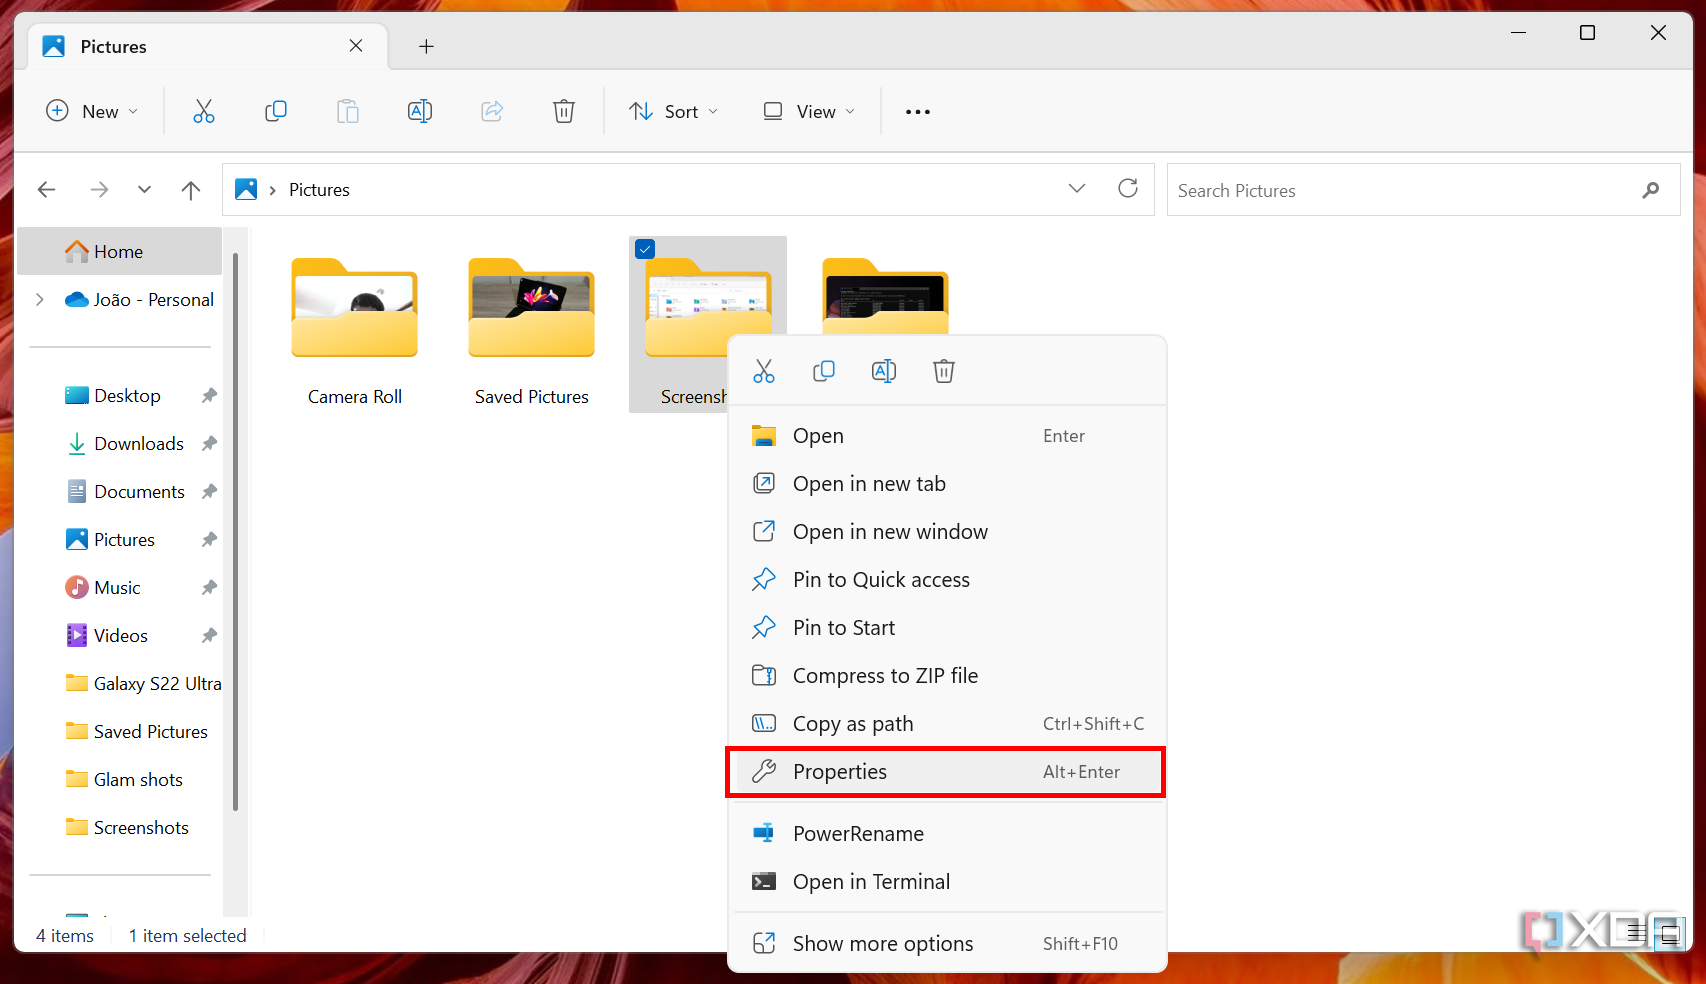 Screenshot of the Pictures library in Windows 11 with the context menu showing options for the Screenshots folder.